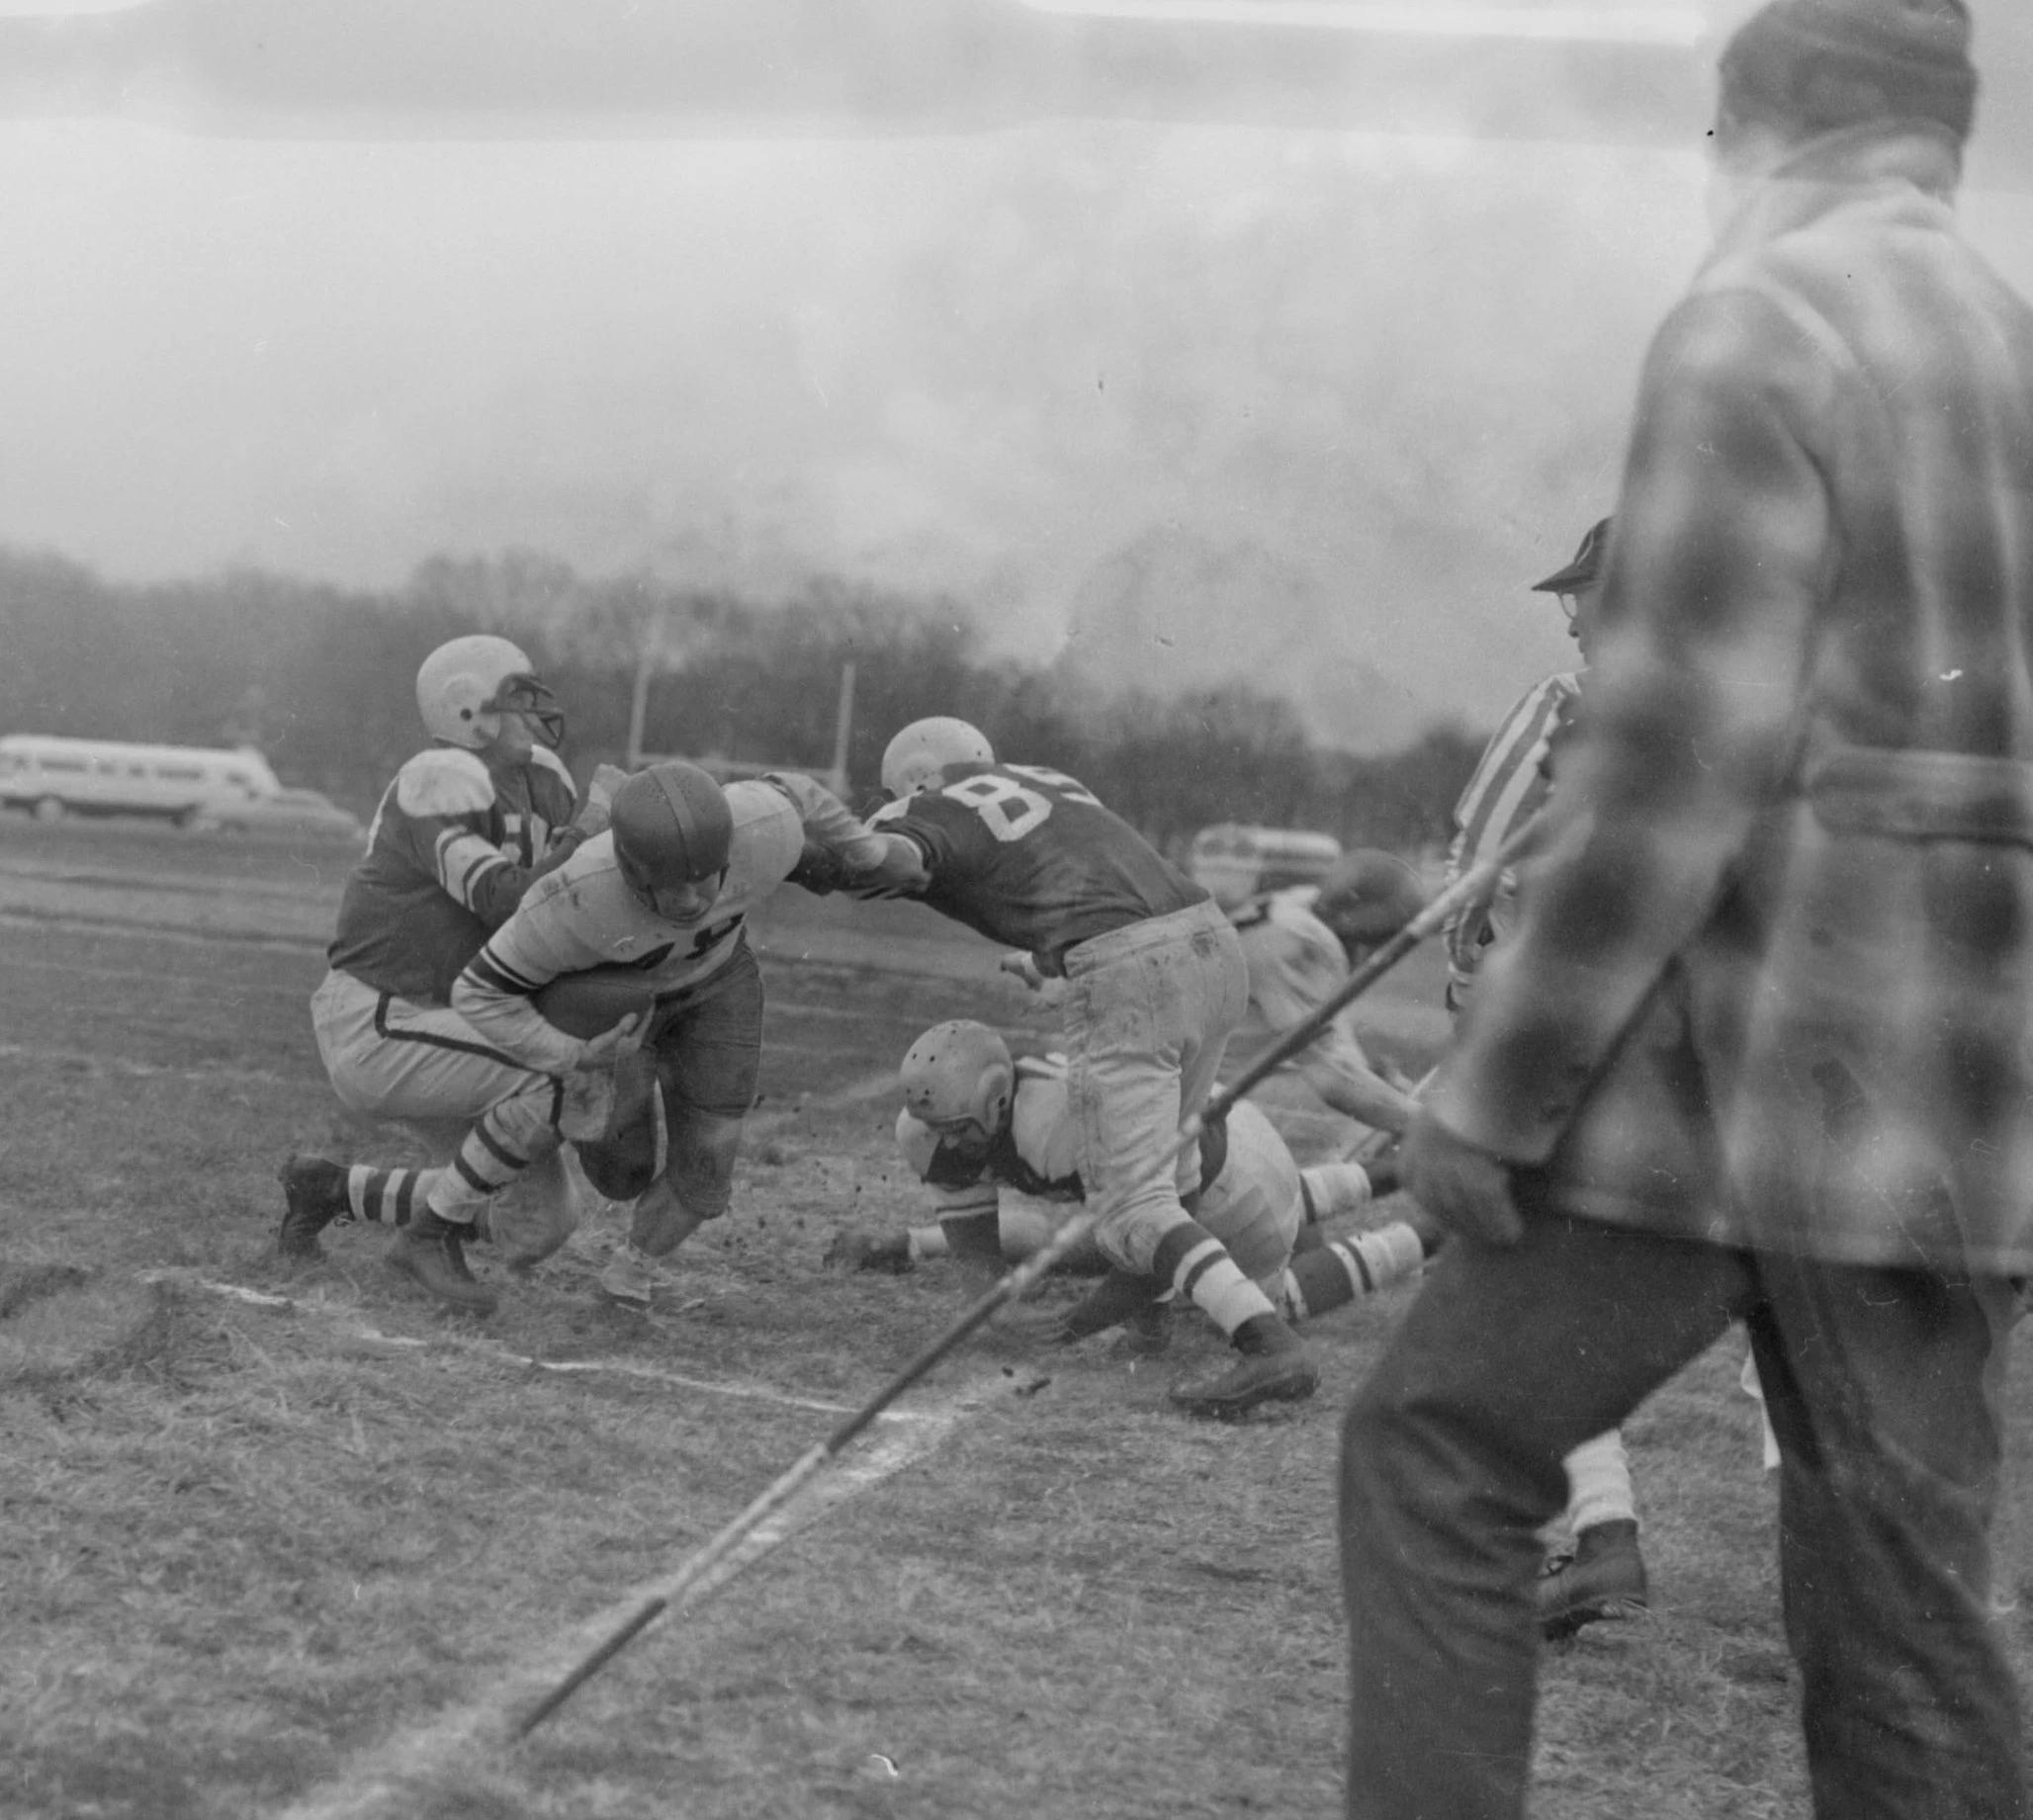 An active shot of a tackle being made on the football field. in the foreground is a man dressed in regular clothing, holding a stick.